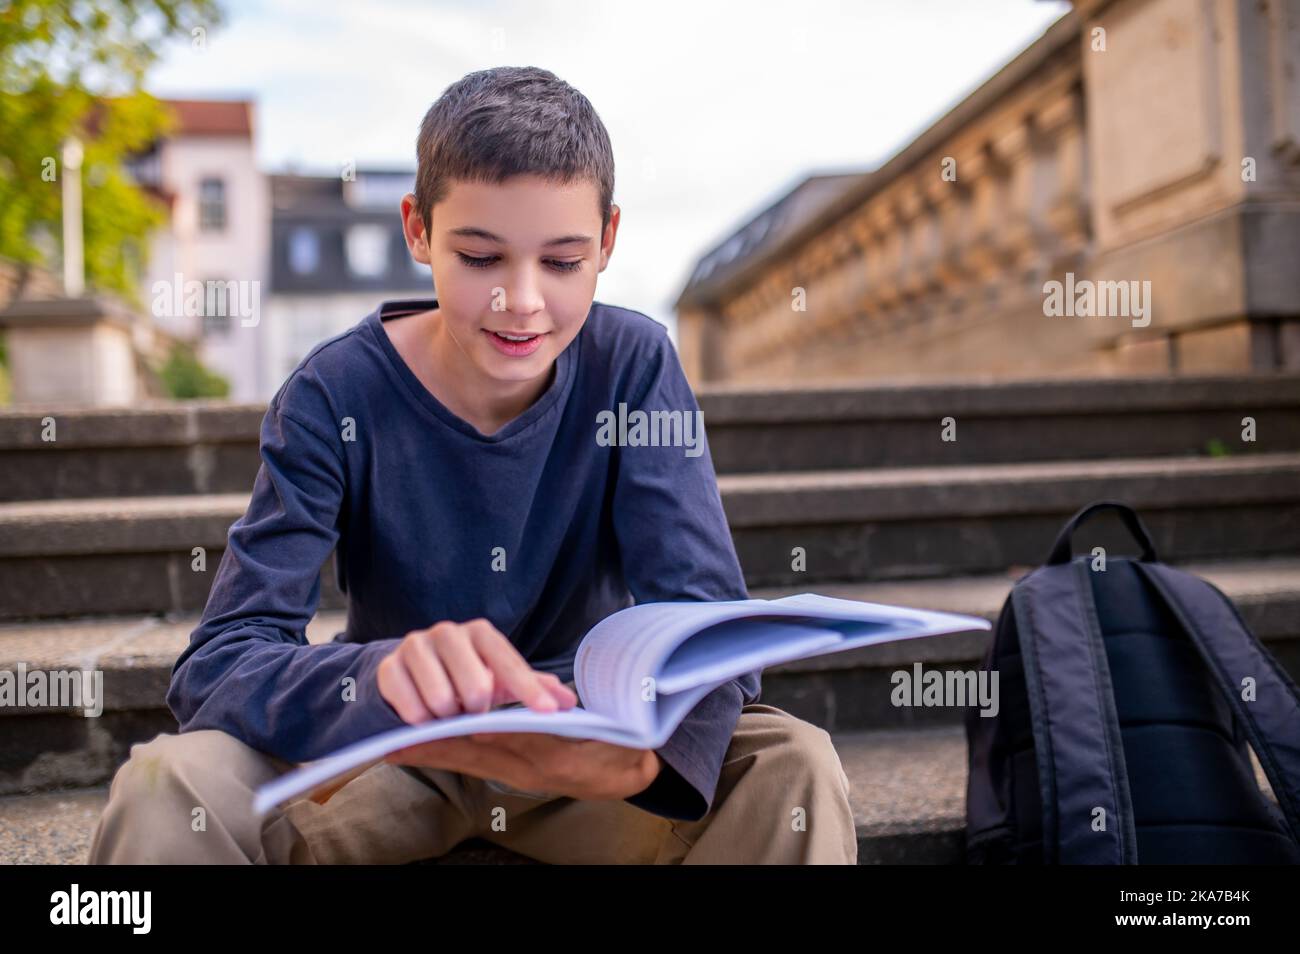 Teenage boy engrossed in reading a book Stock Photo